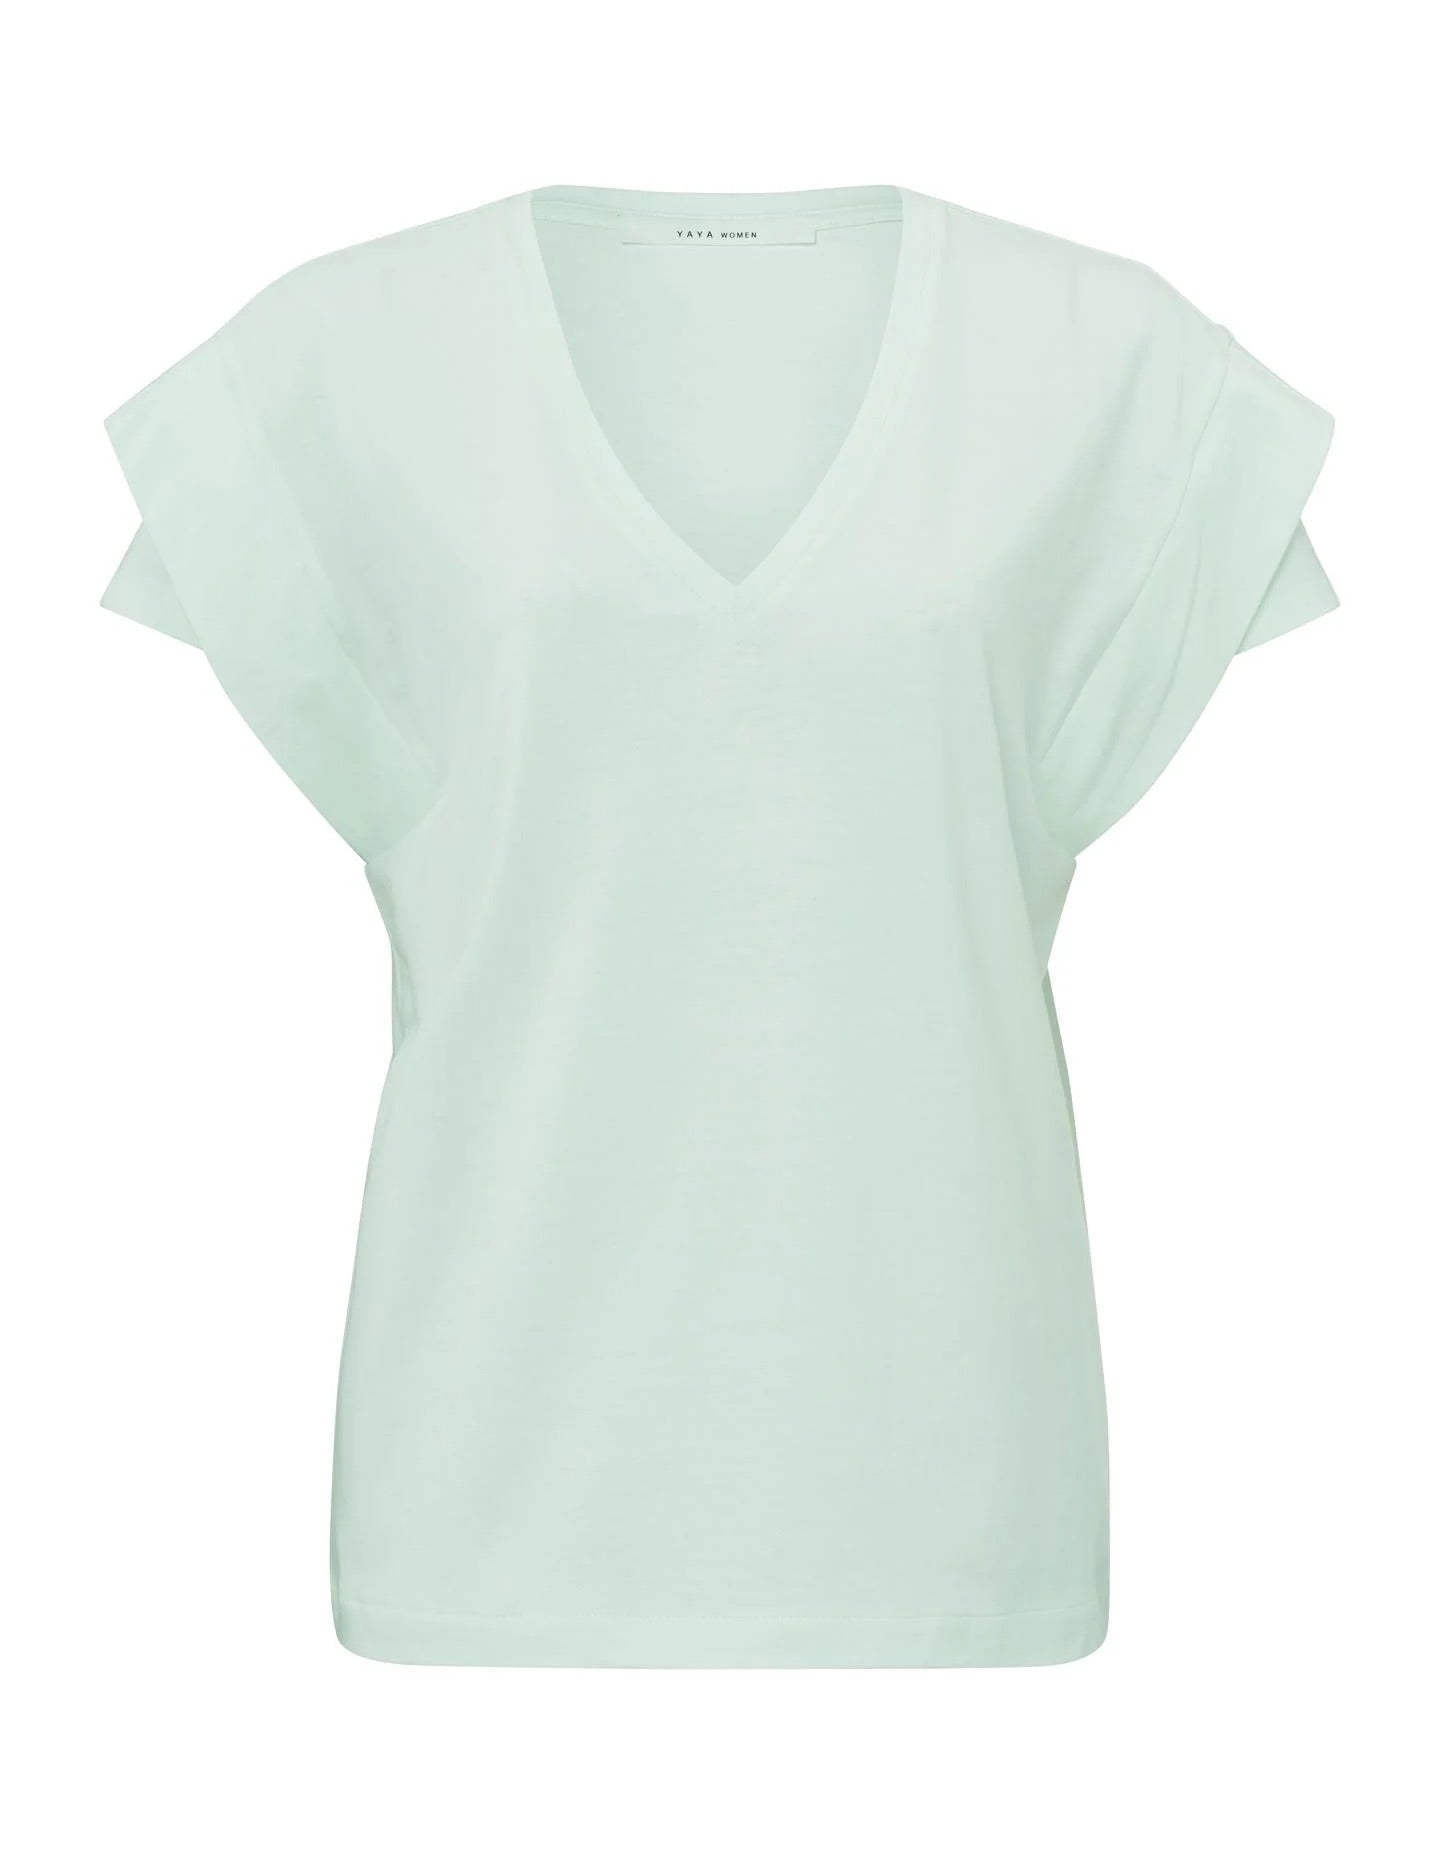 top-with-v-neck-and-double-short-sleeves-in-regular-fit-hint-of-mint-green_2880x_jpg.jpg